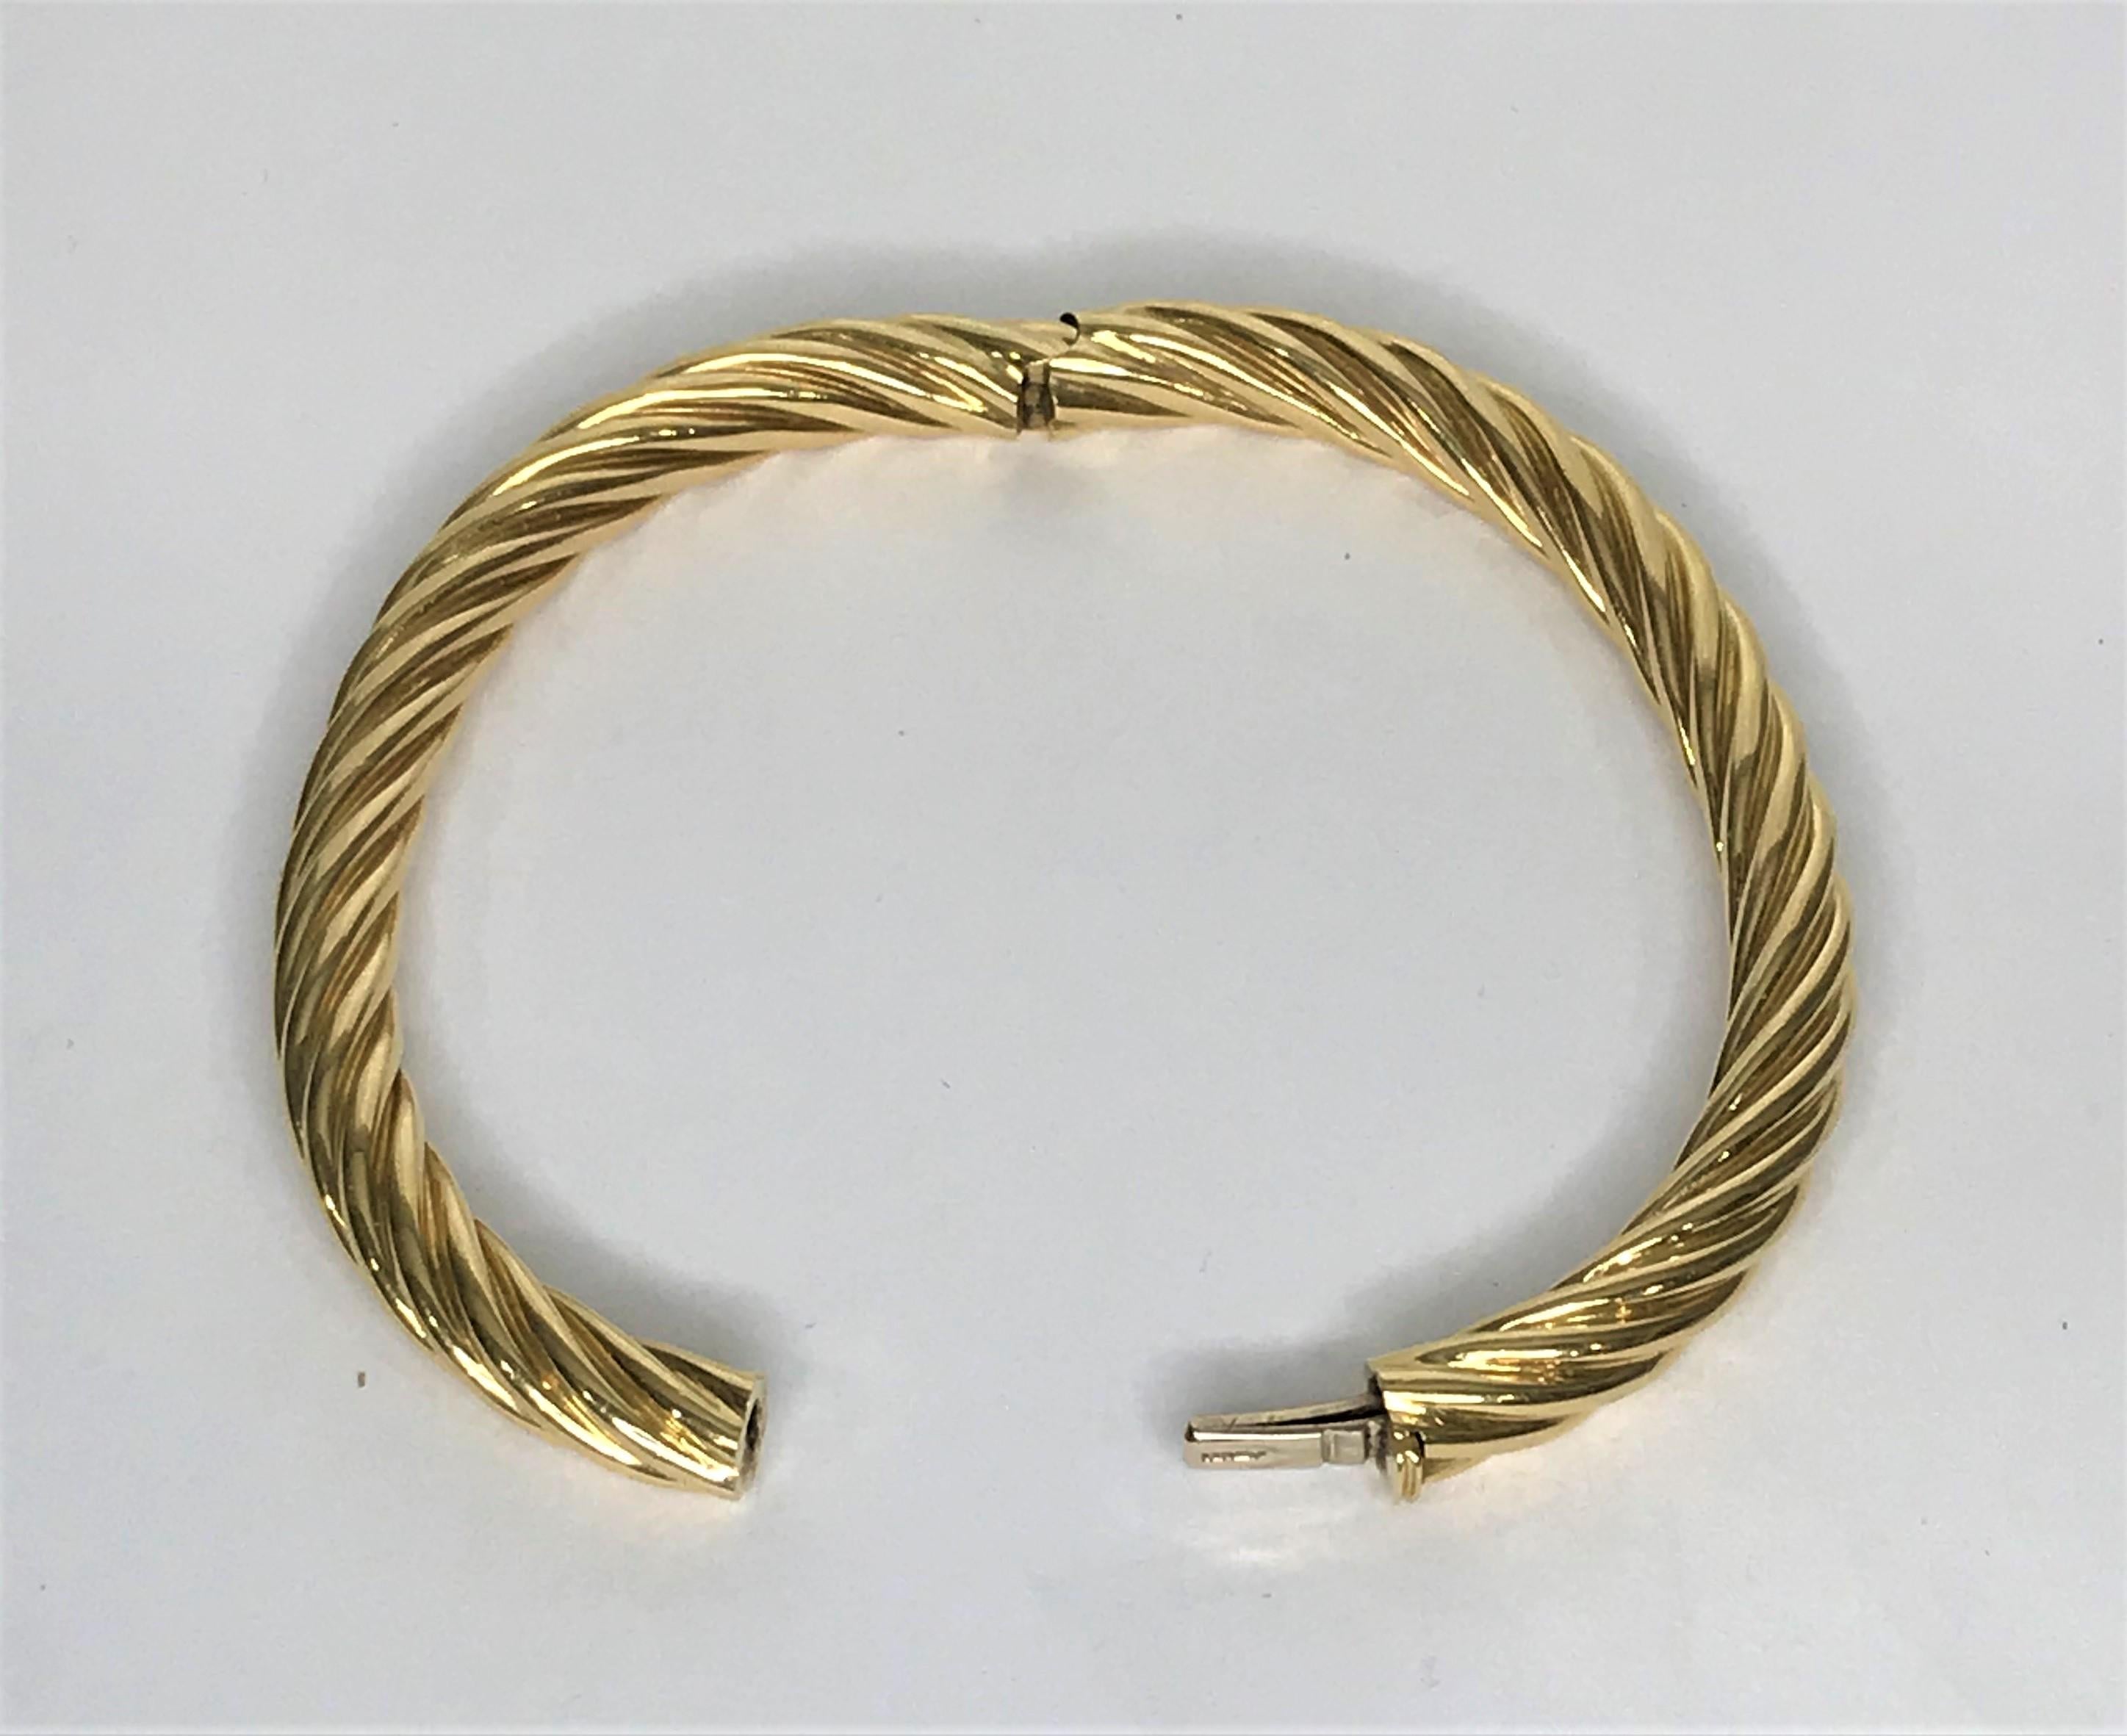 Tiffany & Co. 18 karat gold twist bangle bracelet.
18 karat solid yellow gold  hinged bangle bracelet.  
Oval shape to fit wrist.  Twisted design, polished gold, approximately 6.7mm wide.
Approximately 7 inch inside circumference.
Hidden box clasp-